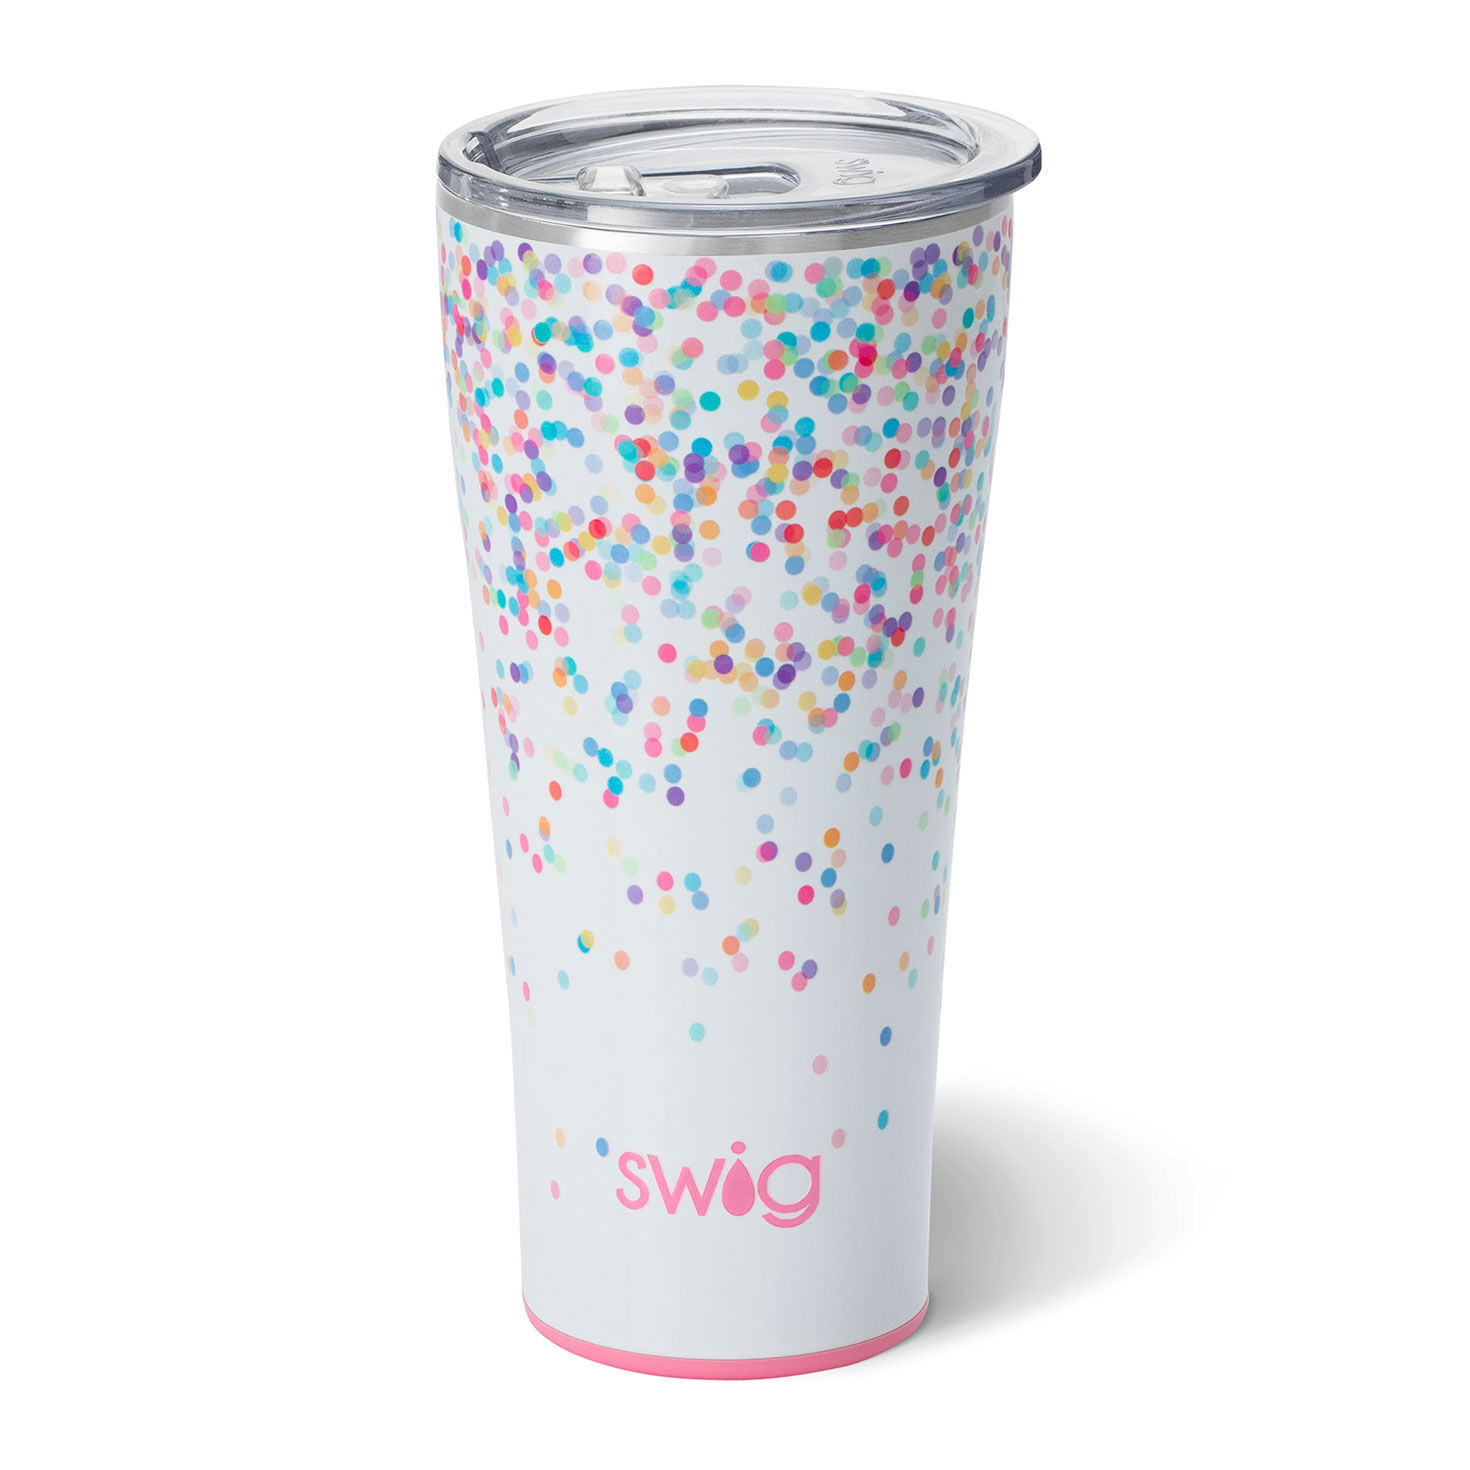 Swig Confetti Stainless Steel Tumbler, 32 oz. for only USD 39.95 | Hallmark